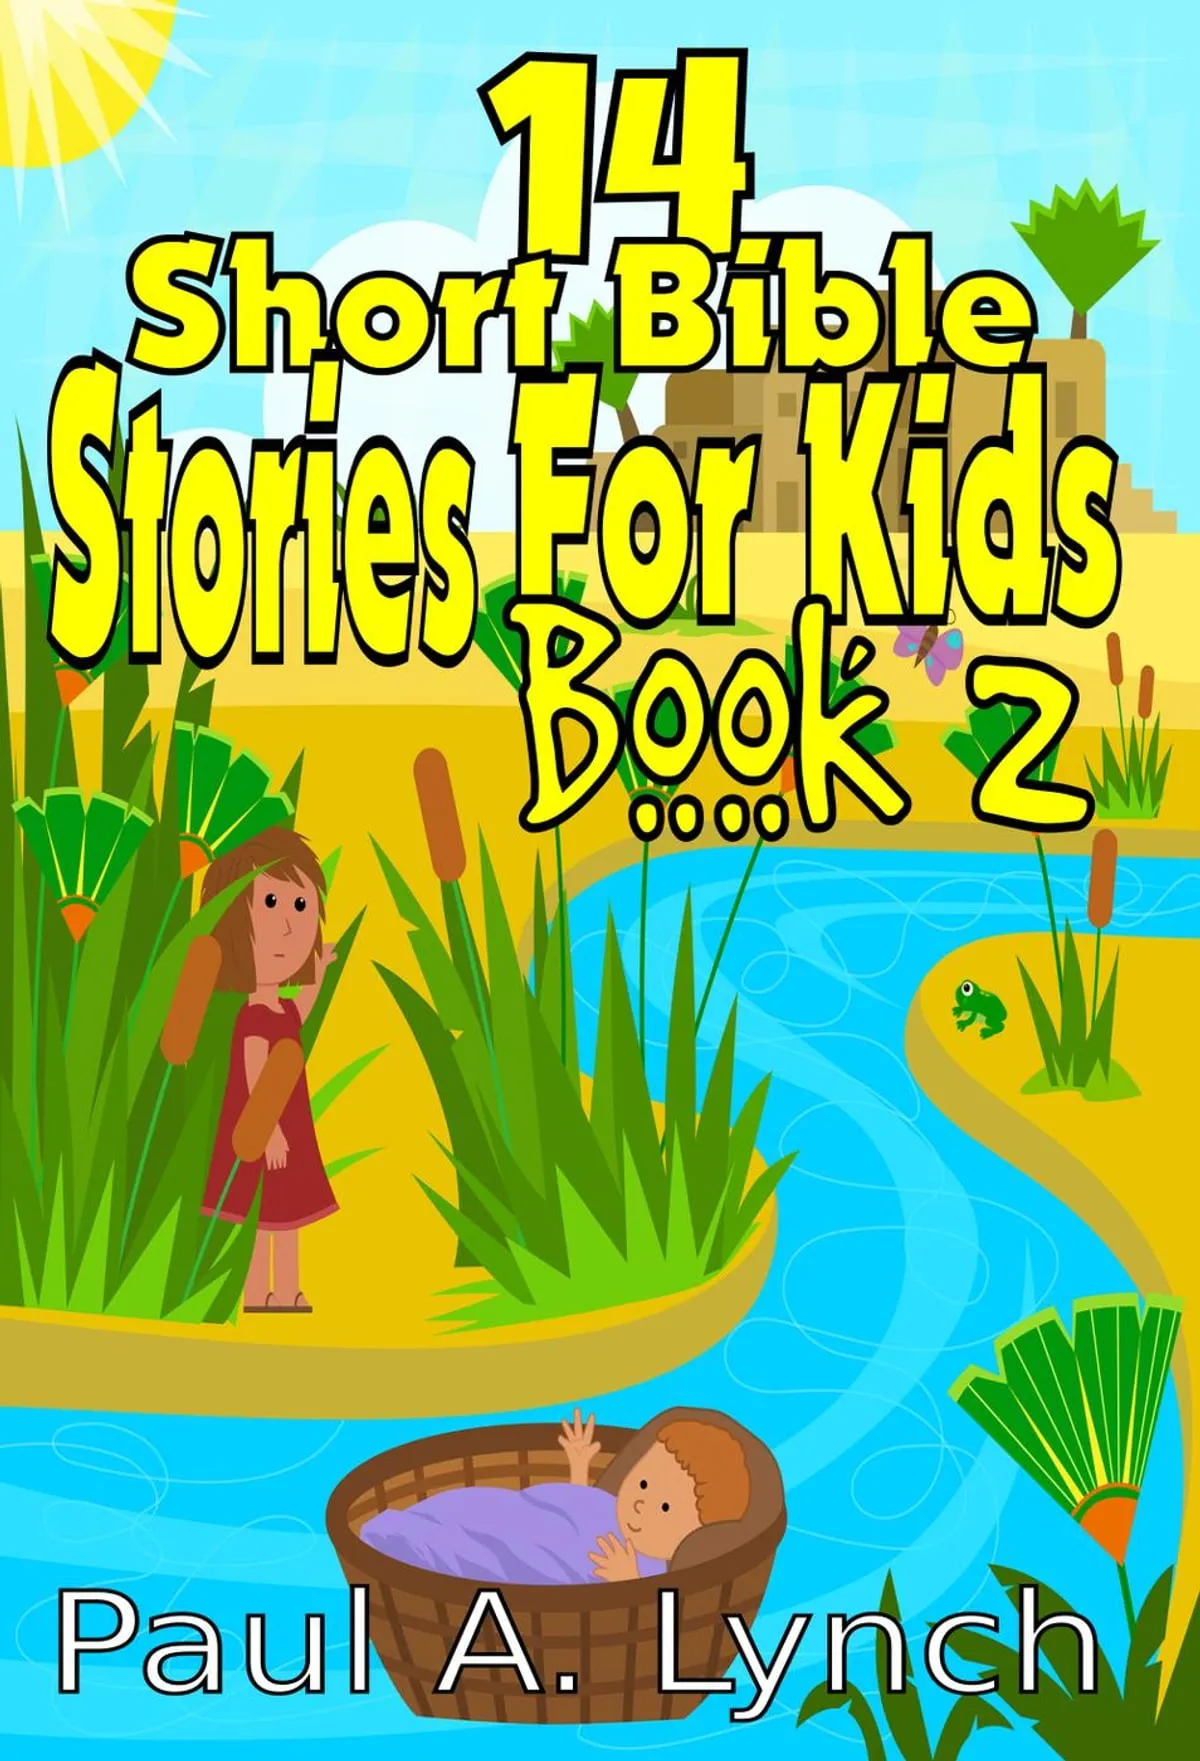 short books of the bible